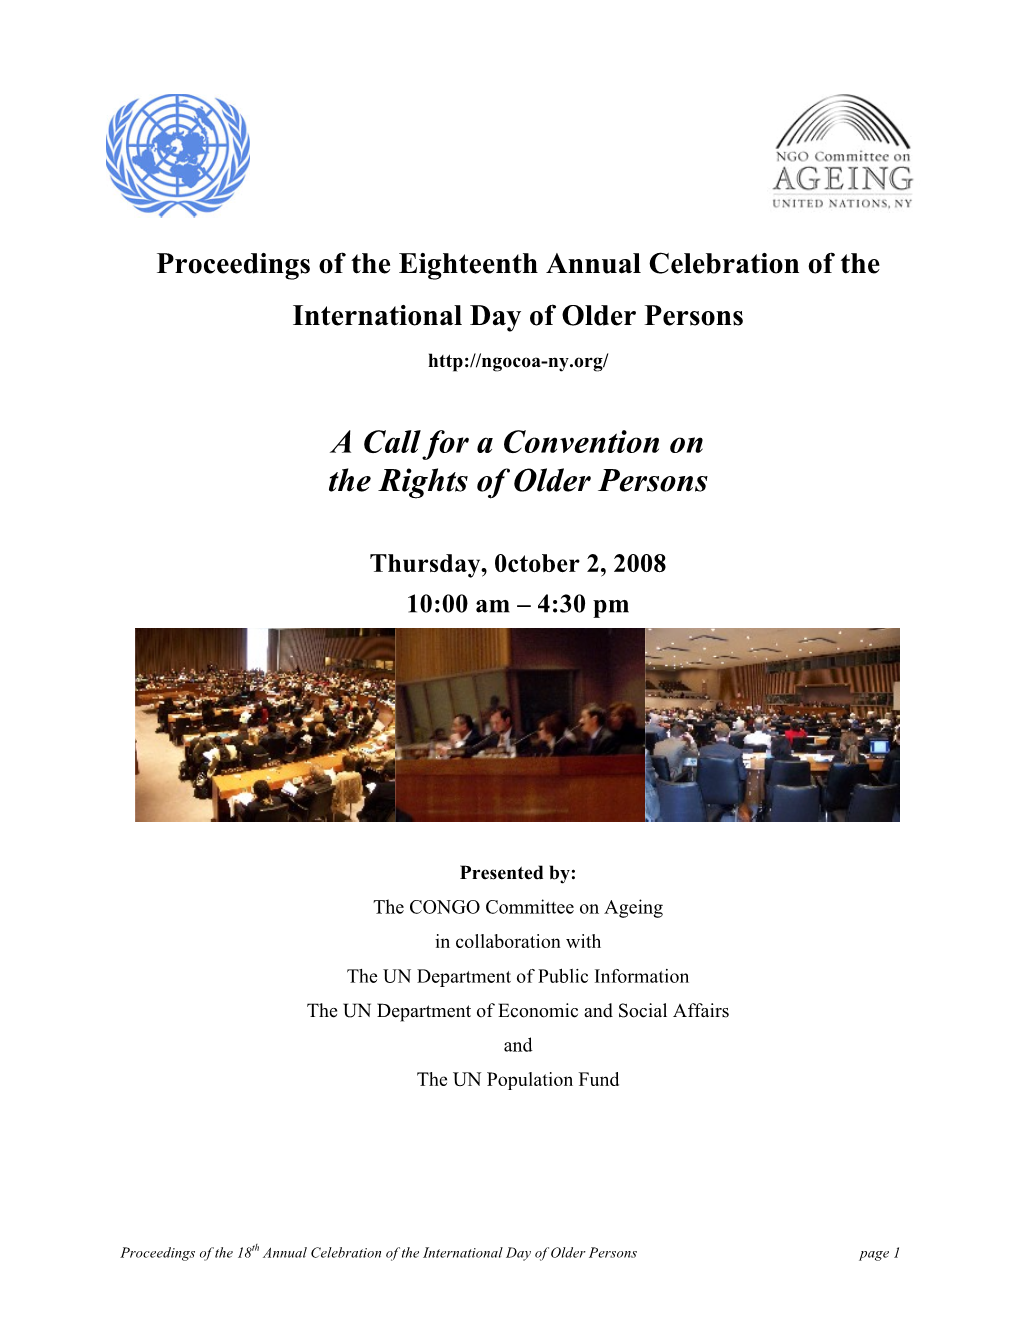 A Call for a Convention on the Rights of Older Persons